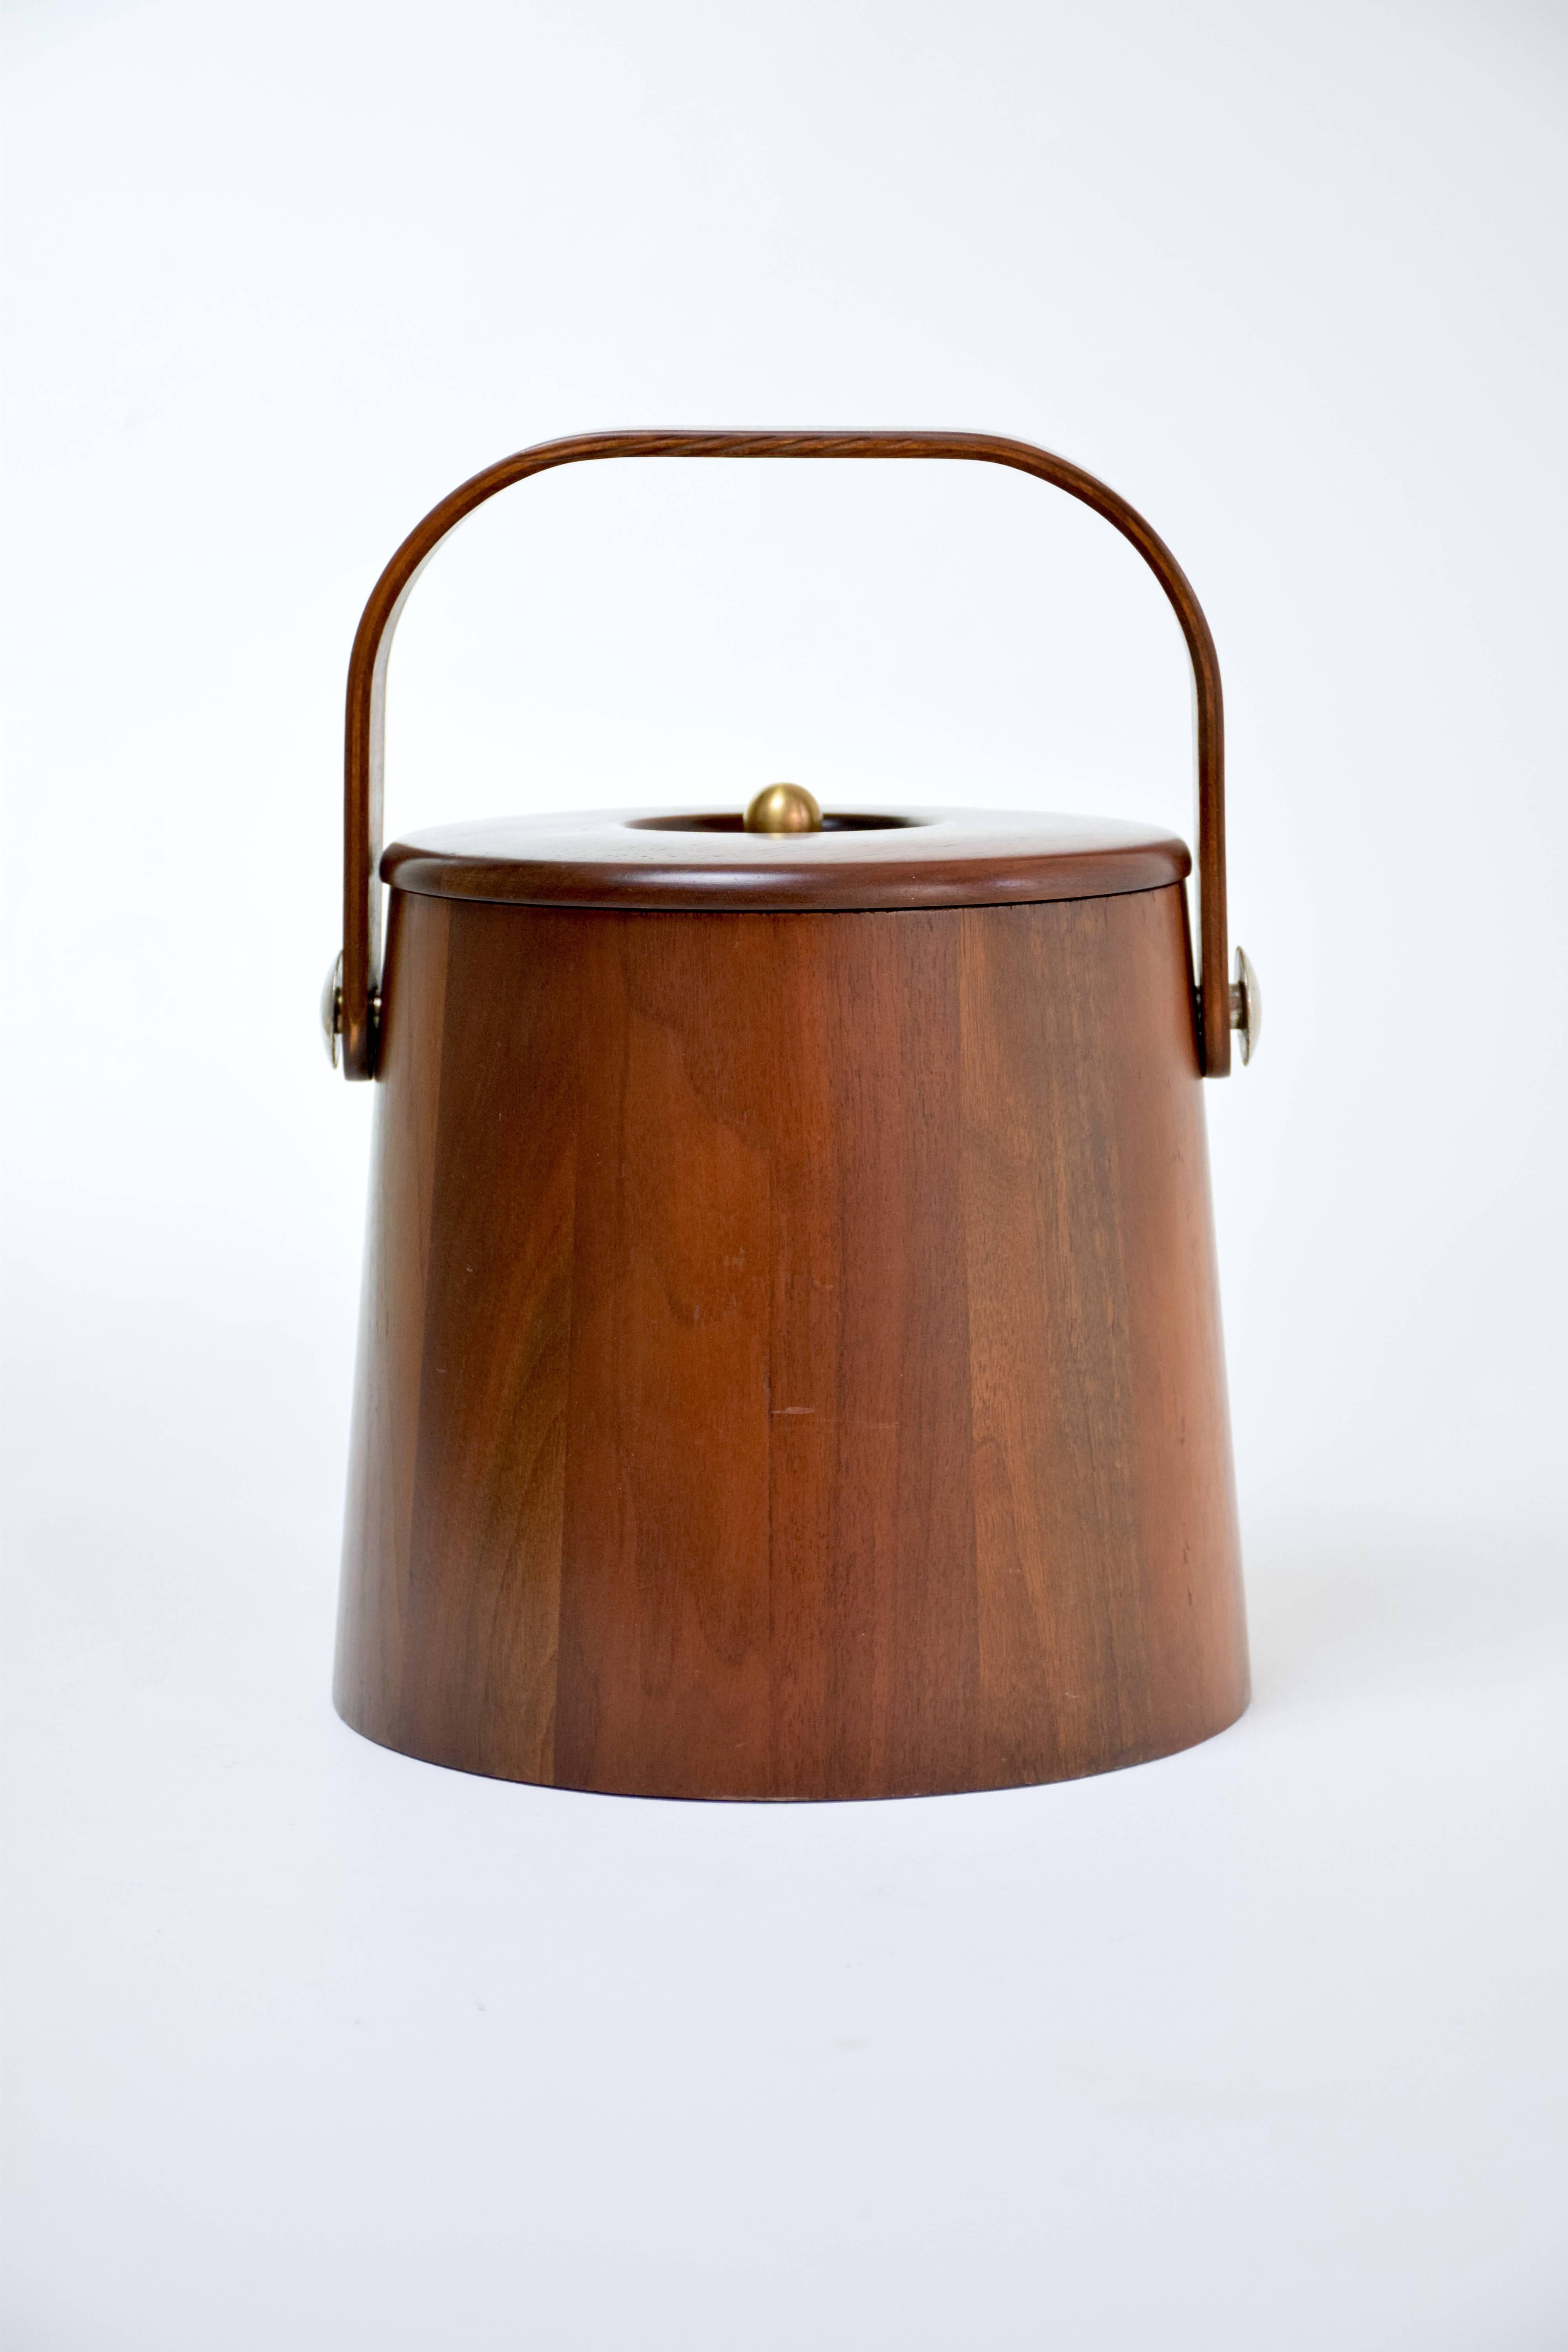 Vintage Danish midcentury ice bucket originating from Denmark in Scandinavian Modern style with brass handle at the top. 
In very good condition.
Circa 1950-1950's. 